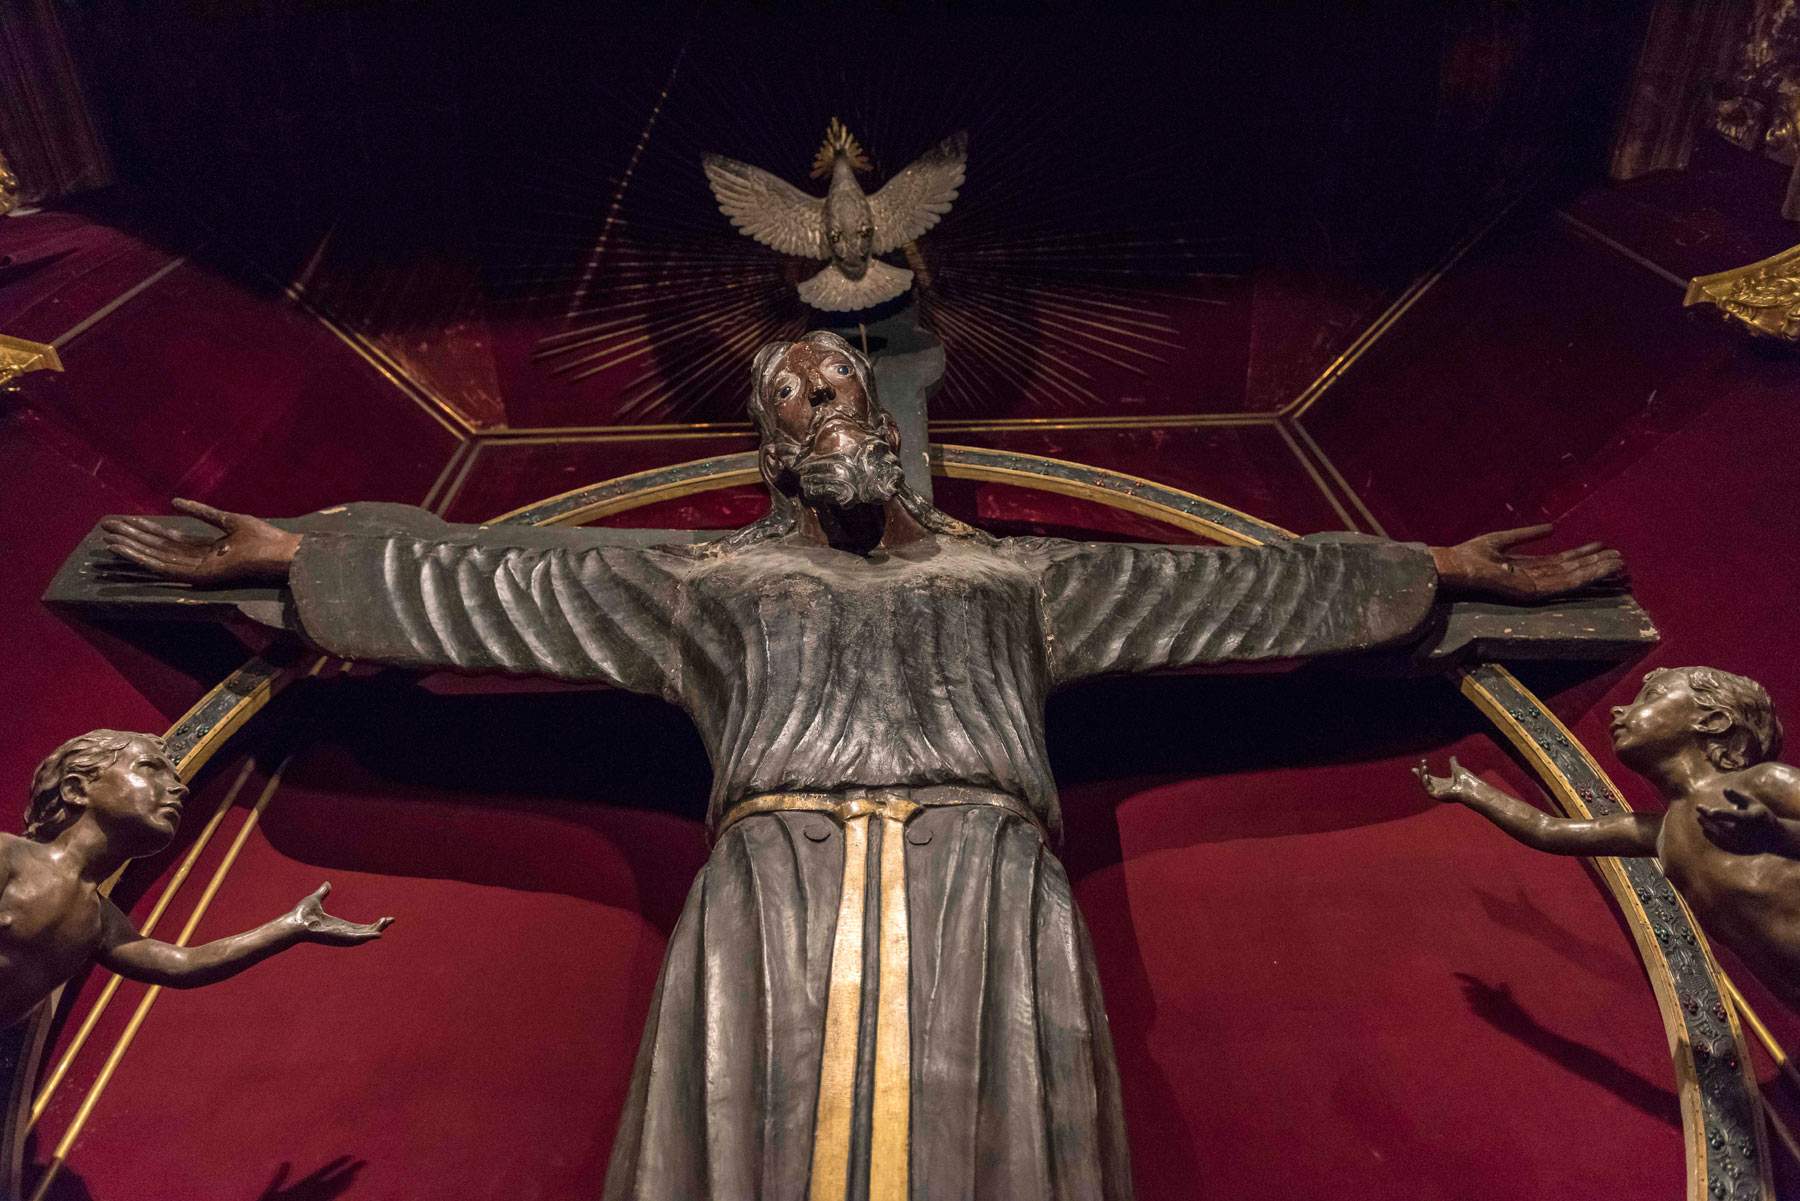 The Holy Face of Lucca, the cathedral's famous crucifix, will be restored